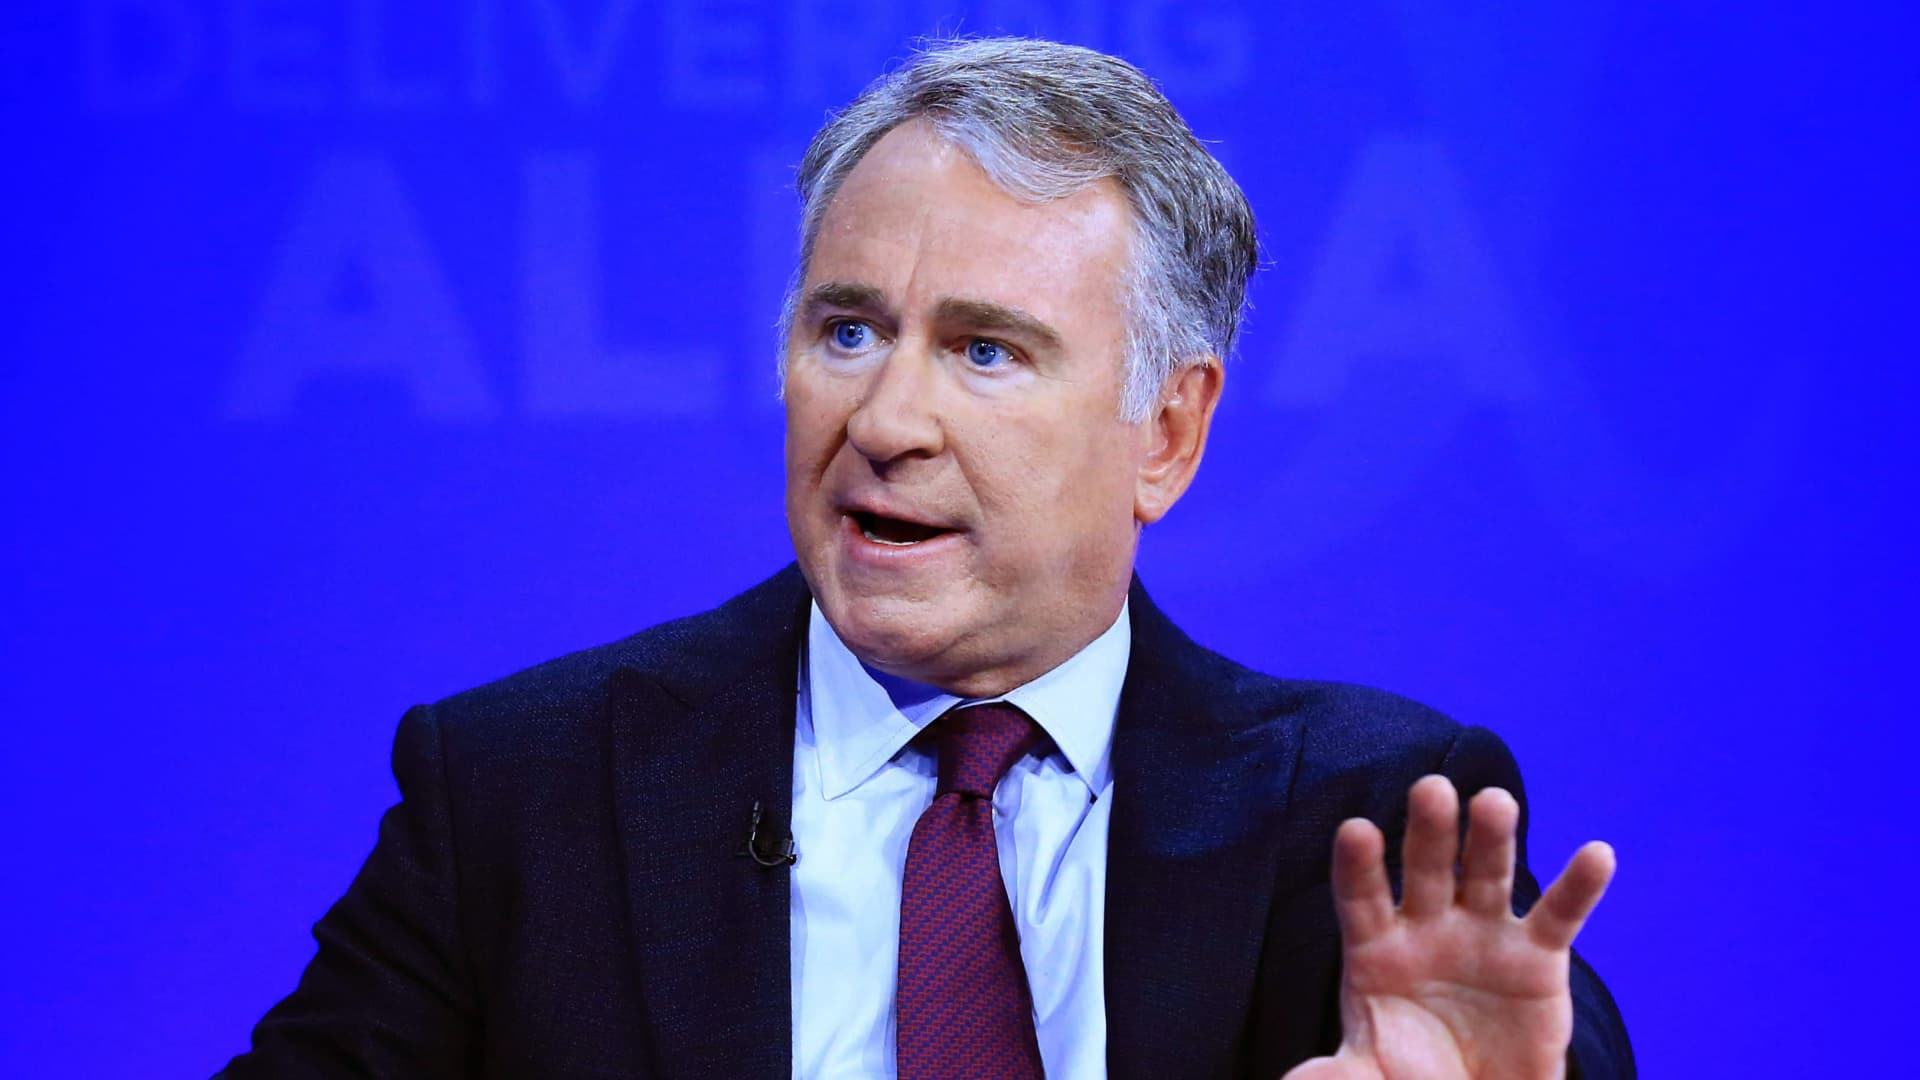 Billionaire Ken Griffin sues the IRS after his tax records were disclosed